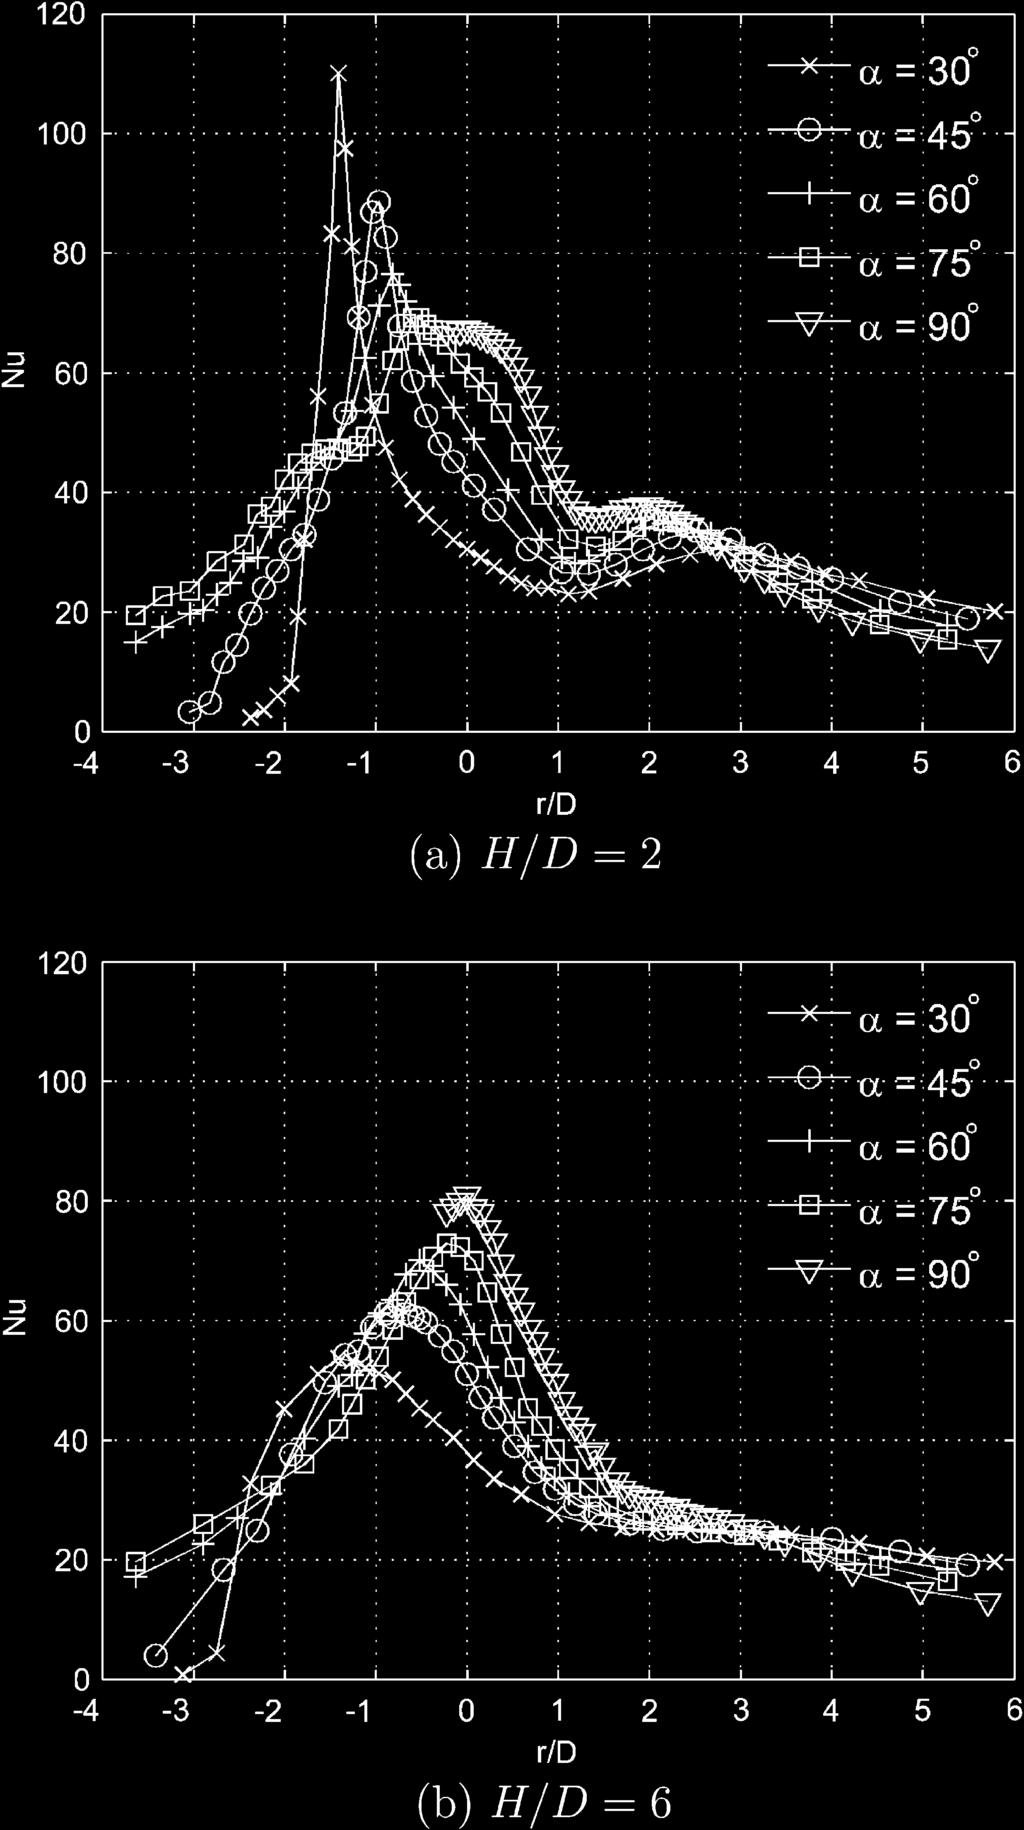 6172 T.S. O Donovan, D.B. Murray / International Journal of Heat and Mass Transfer 51 (2008) 6169 6179 Fig. 3. Displacement of stagnation point from geometric centre.